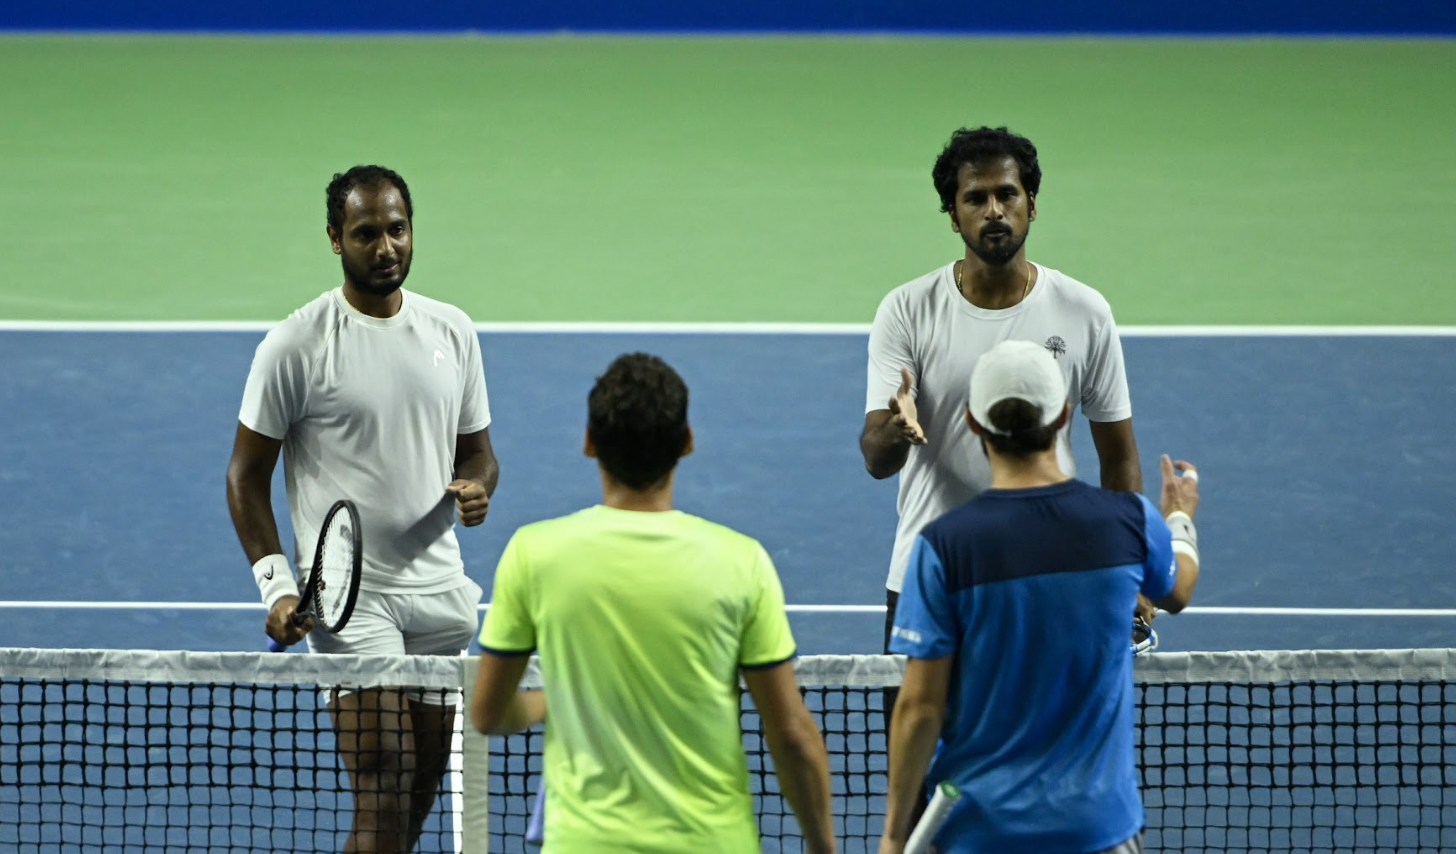 “The crowd support carried us home today” – Saketh Myneni & Ramkumar Ramanathan after beating the 2nd seeds in Pune